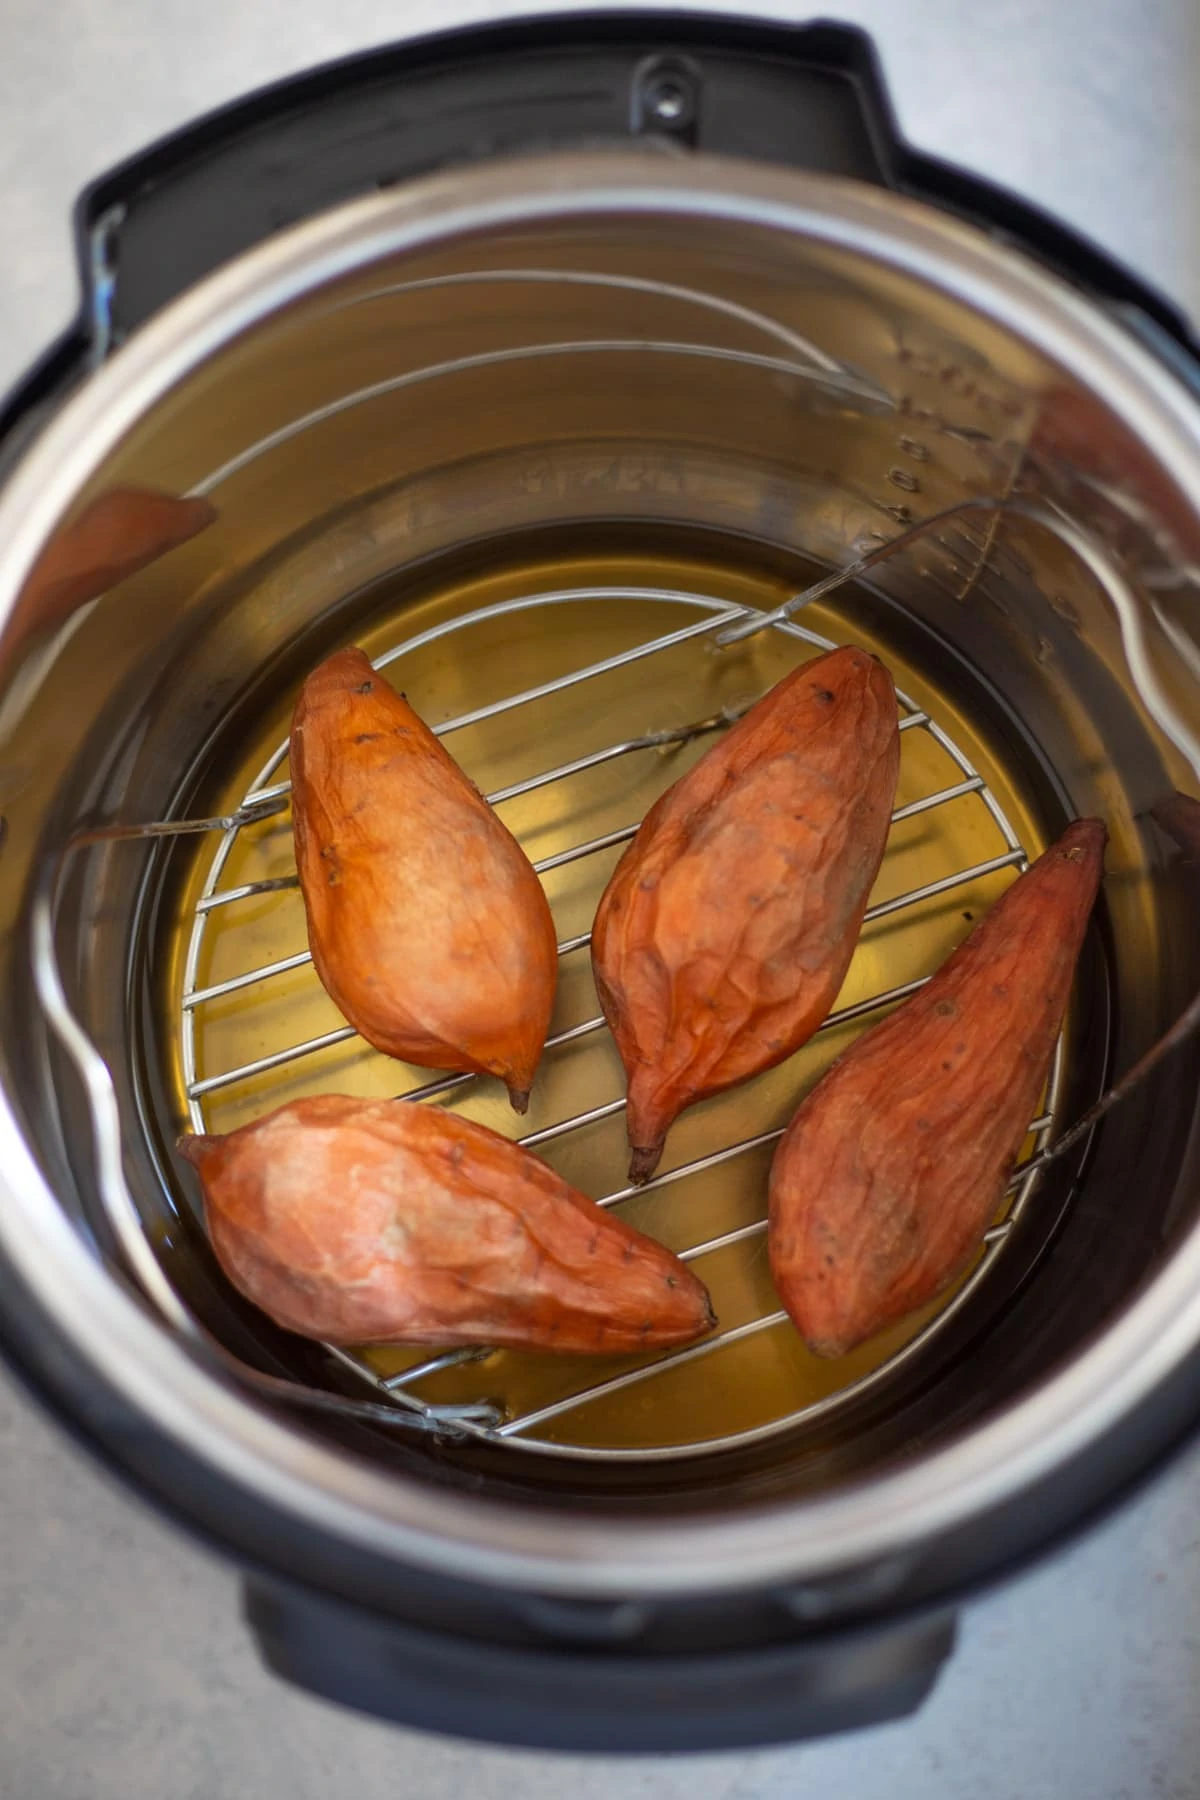 Sweet potatoes cooked in the instant pot